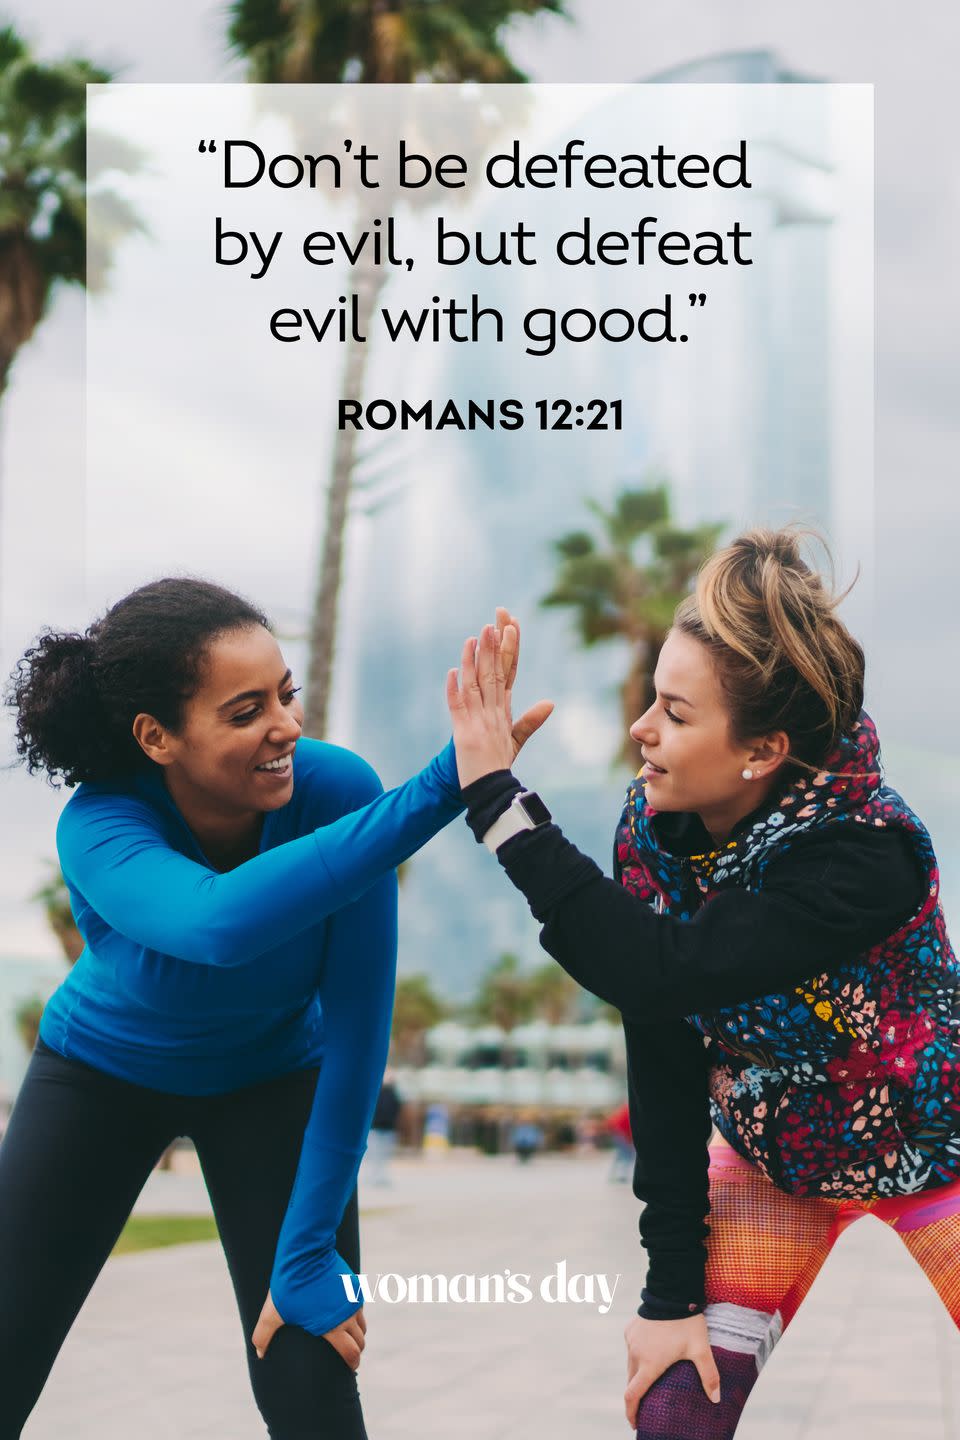 <p>“Don’t be defeated by evil, but defeat evil with good.”</p><p>The Good News: Just because you see those doing better than you, that doesn’t mean God has forgotten about you.</p>